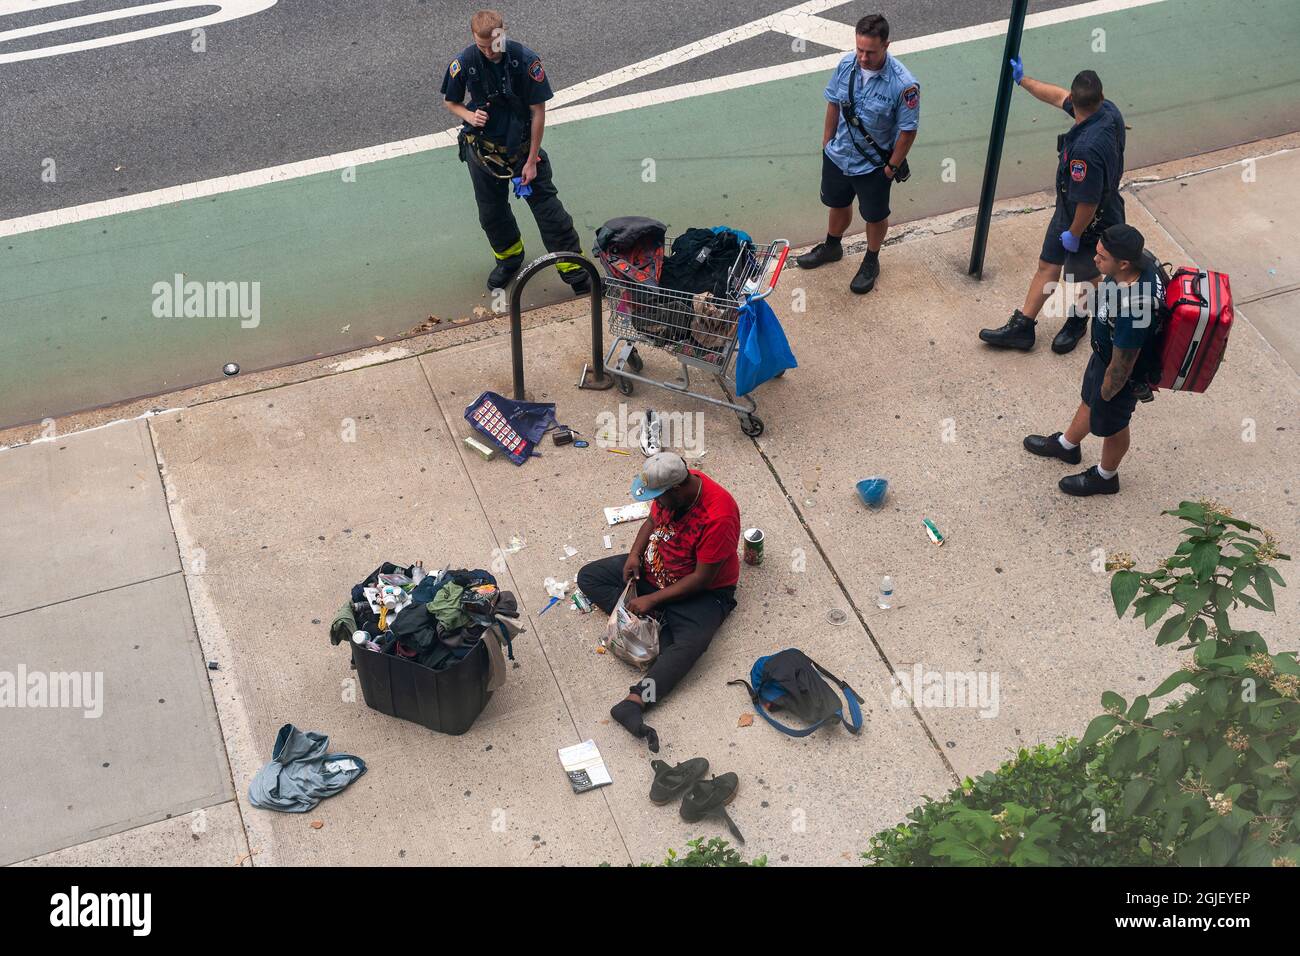 Members of the FDNY wait as a homeless individual collects his possessions after sleeping in the middle of the sidewalk in Chelsea in New York on Sunday, August 29, 2021. (© Richard B. Levine) Stock Photo